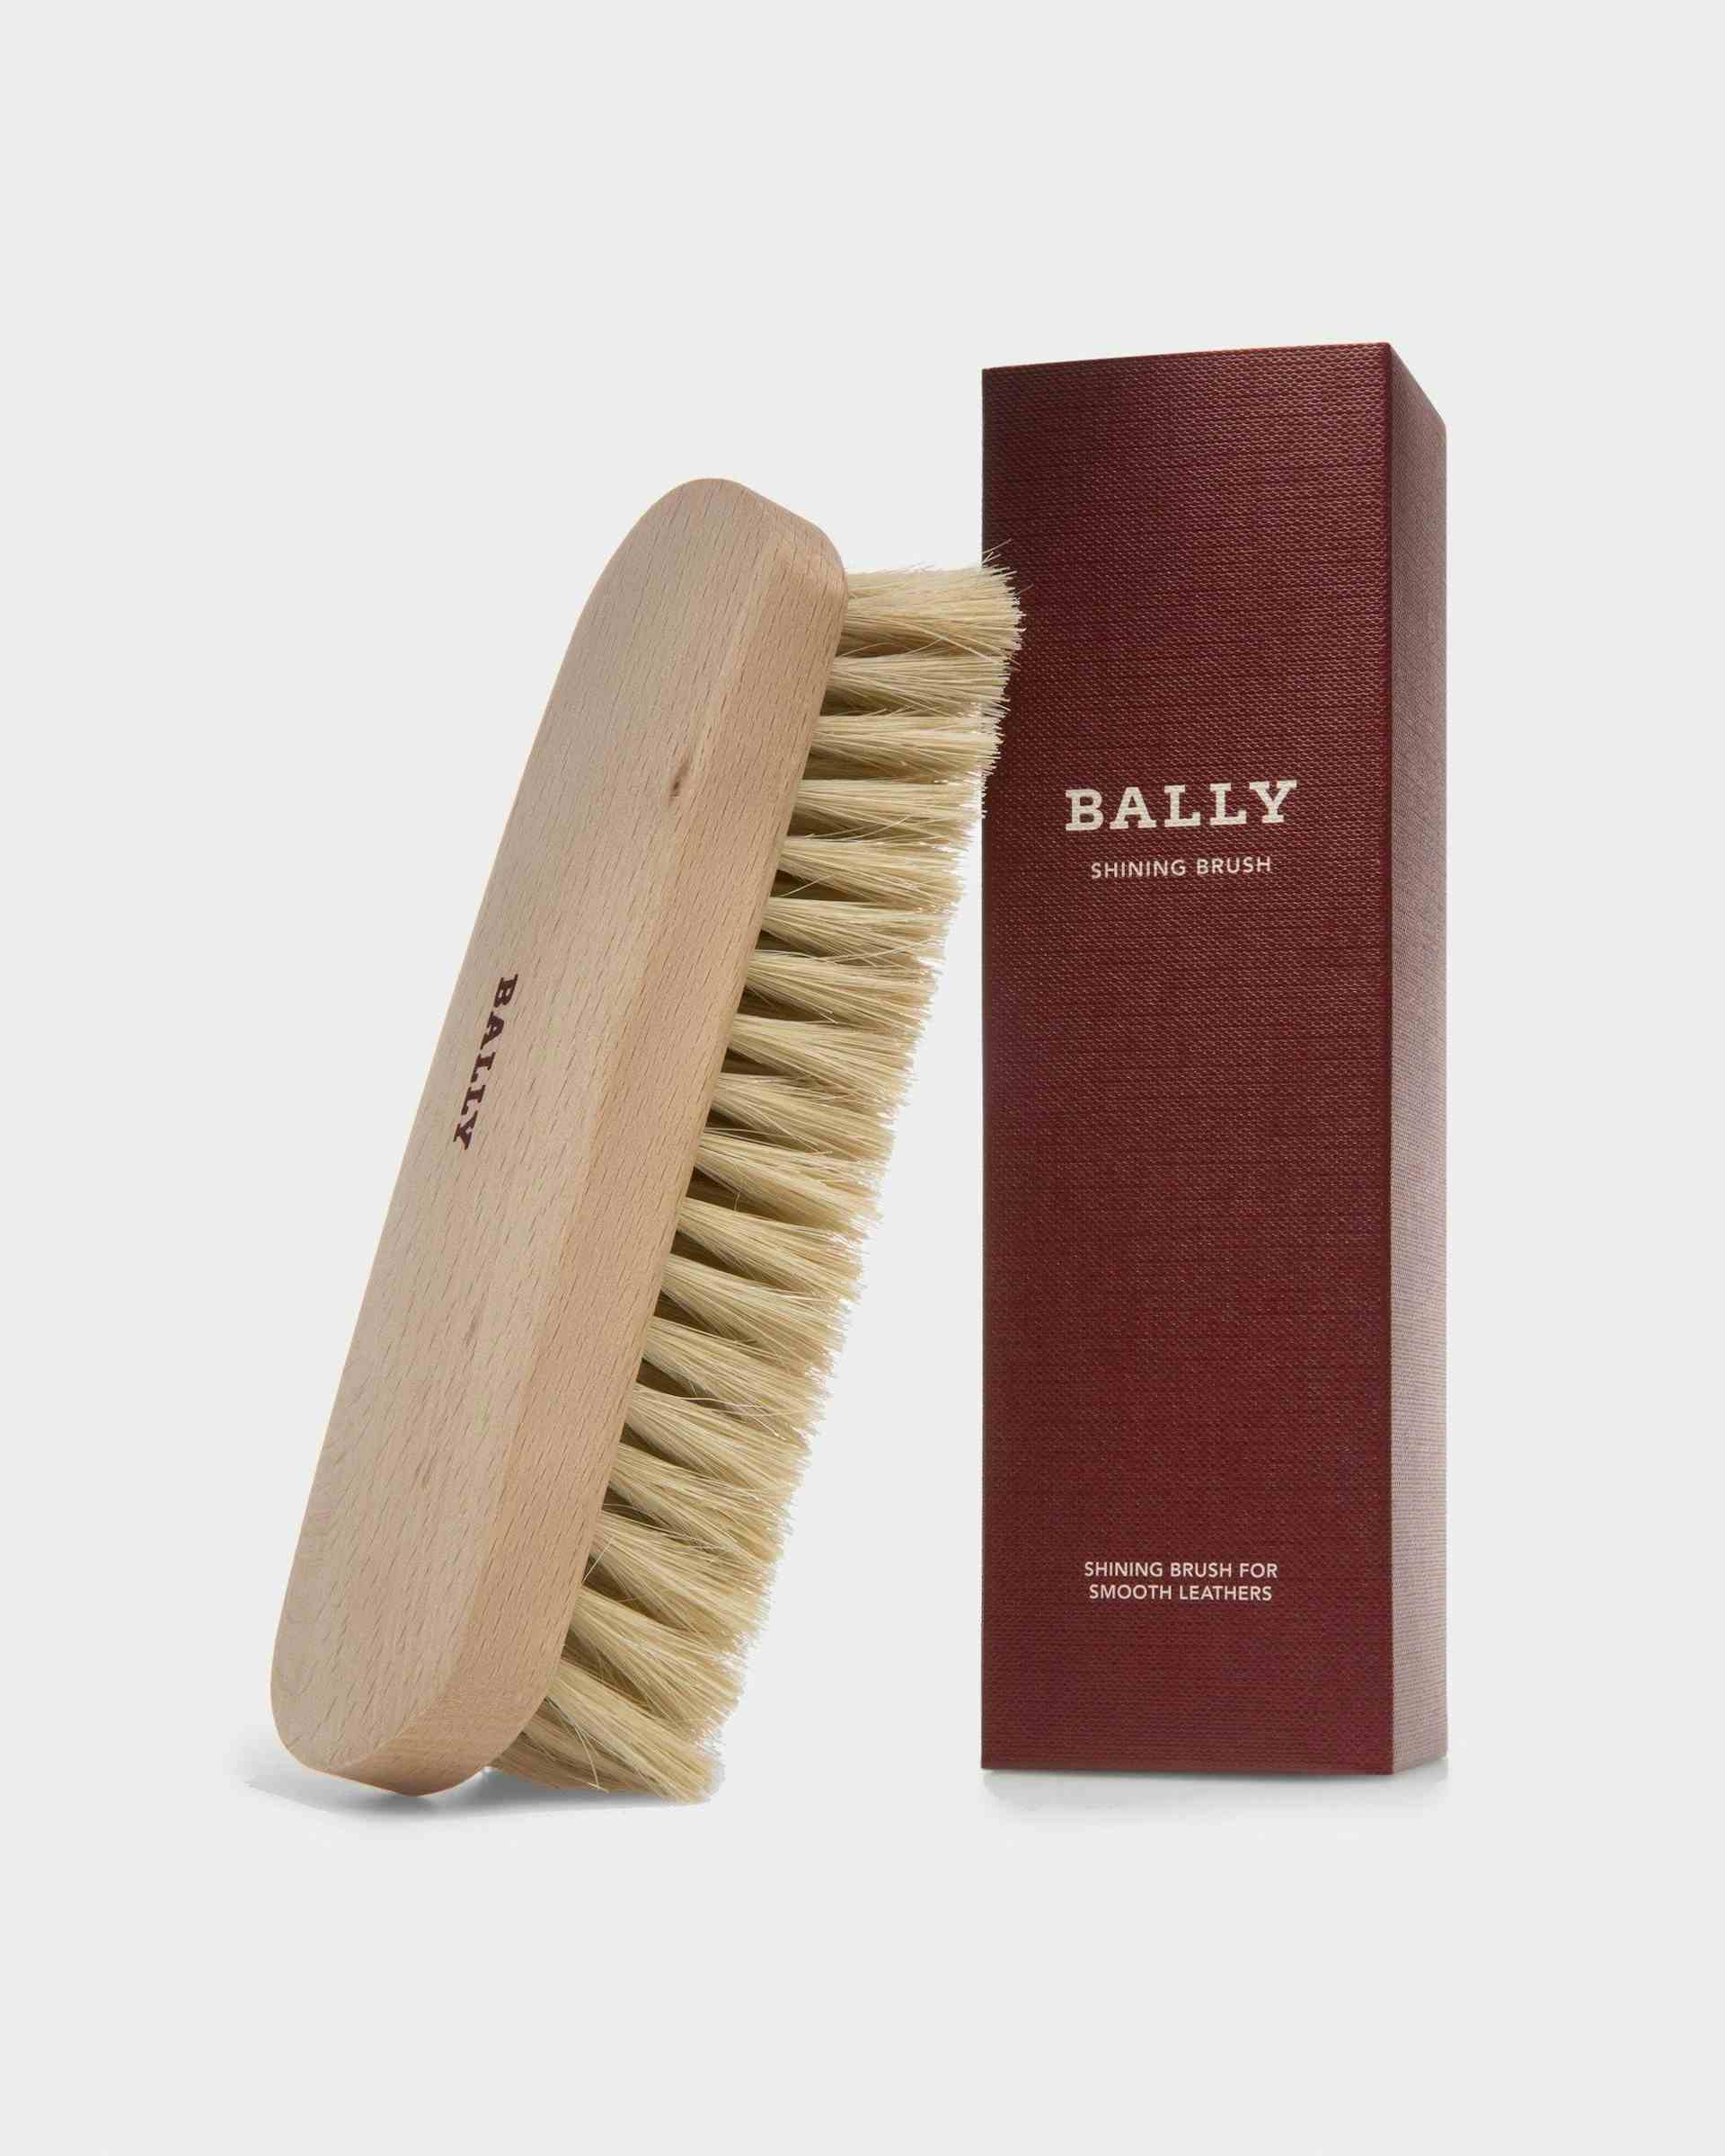 Shining Brush Shoe Care Accessory For Leather - Men's - Bally